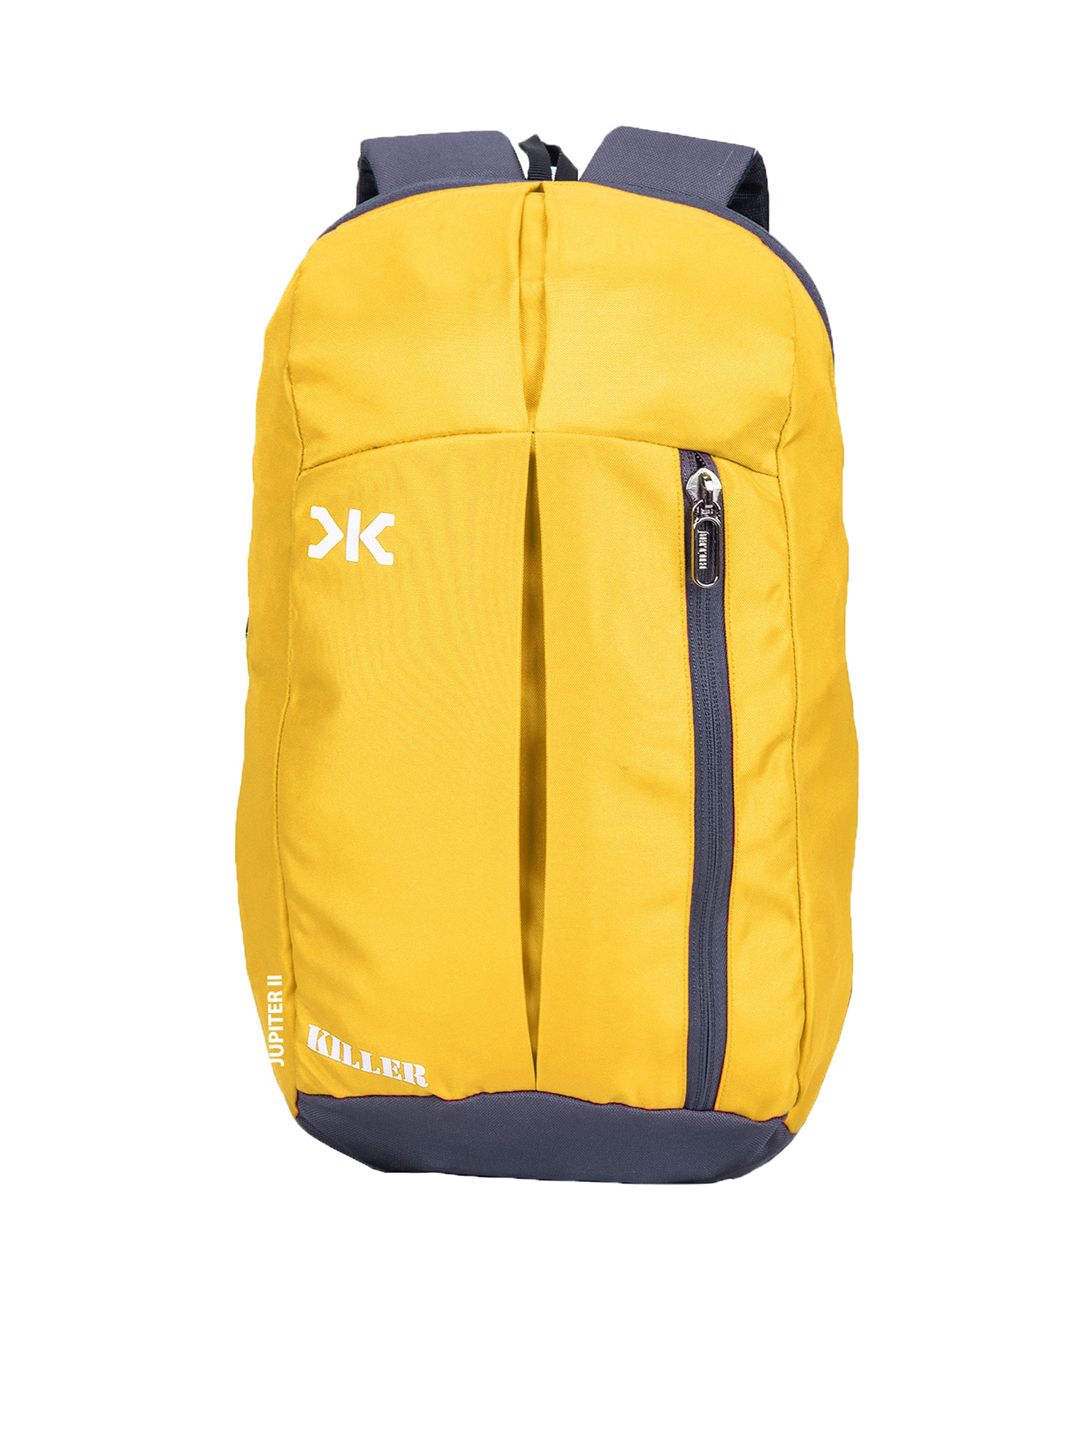 Killer Unisex Yellow Solid Hiking Bag Price in India